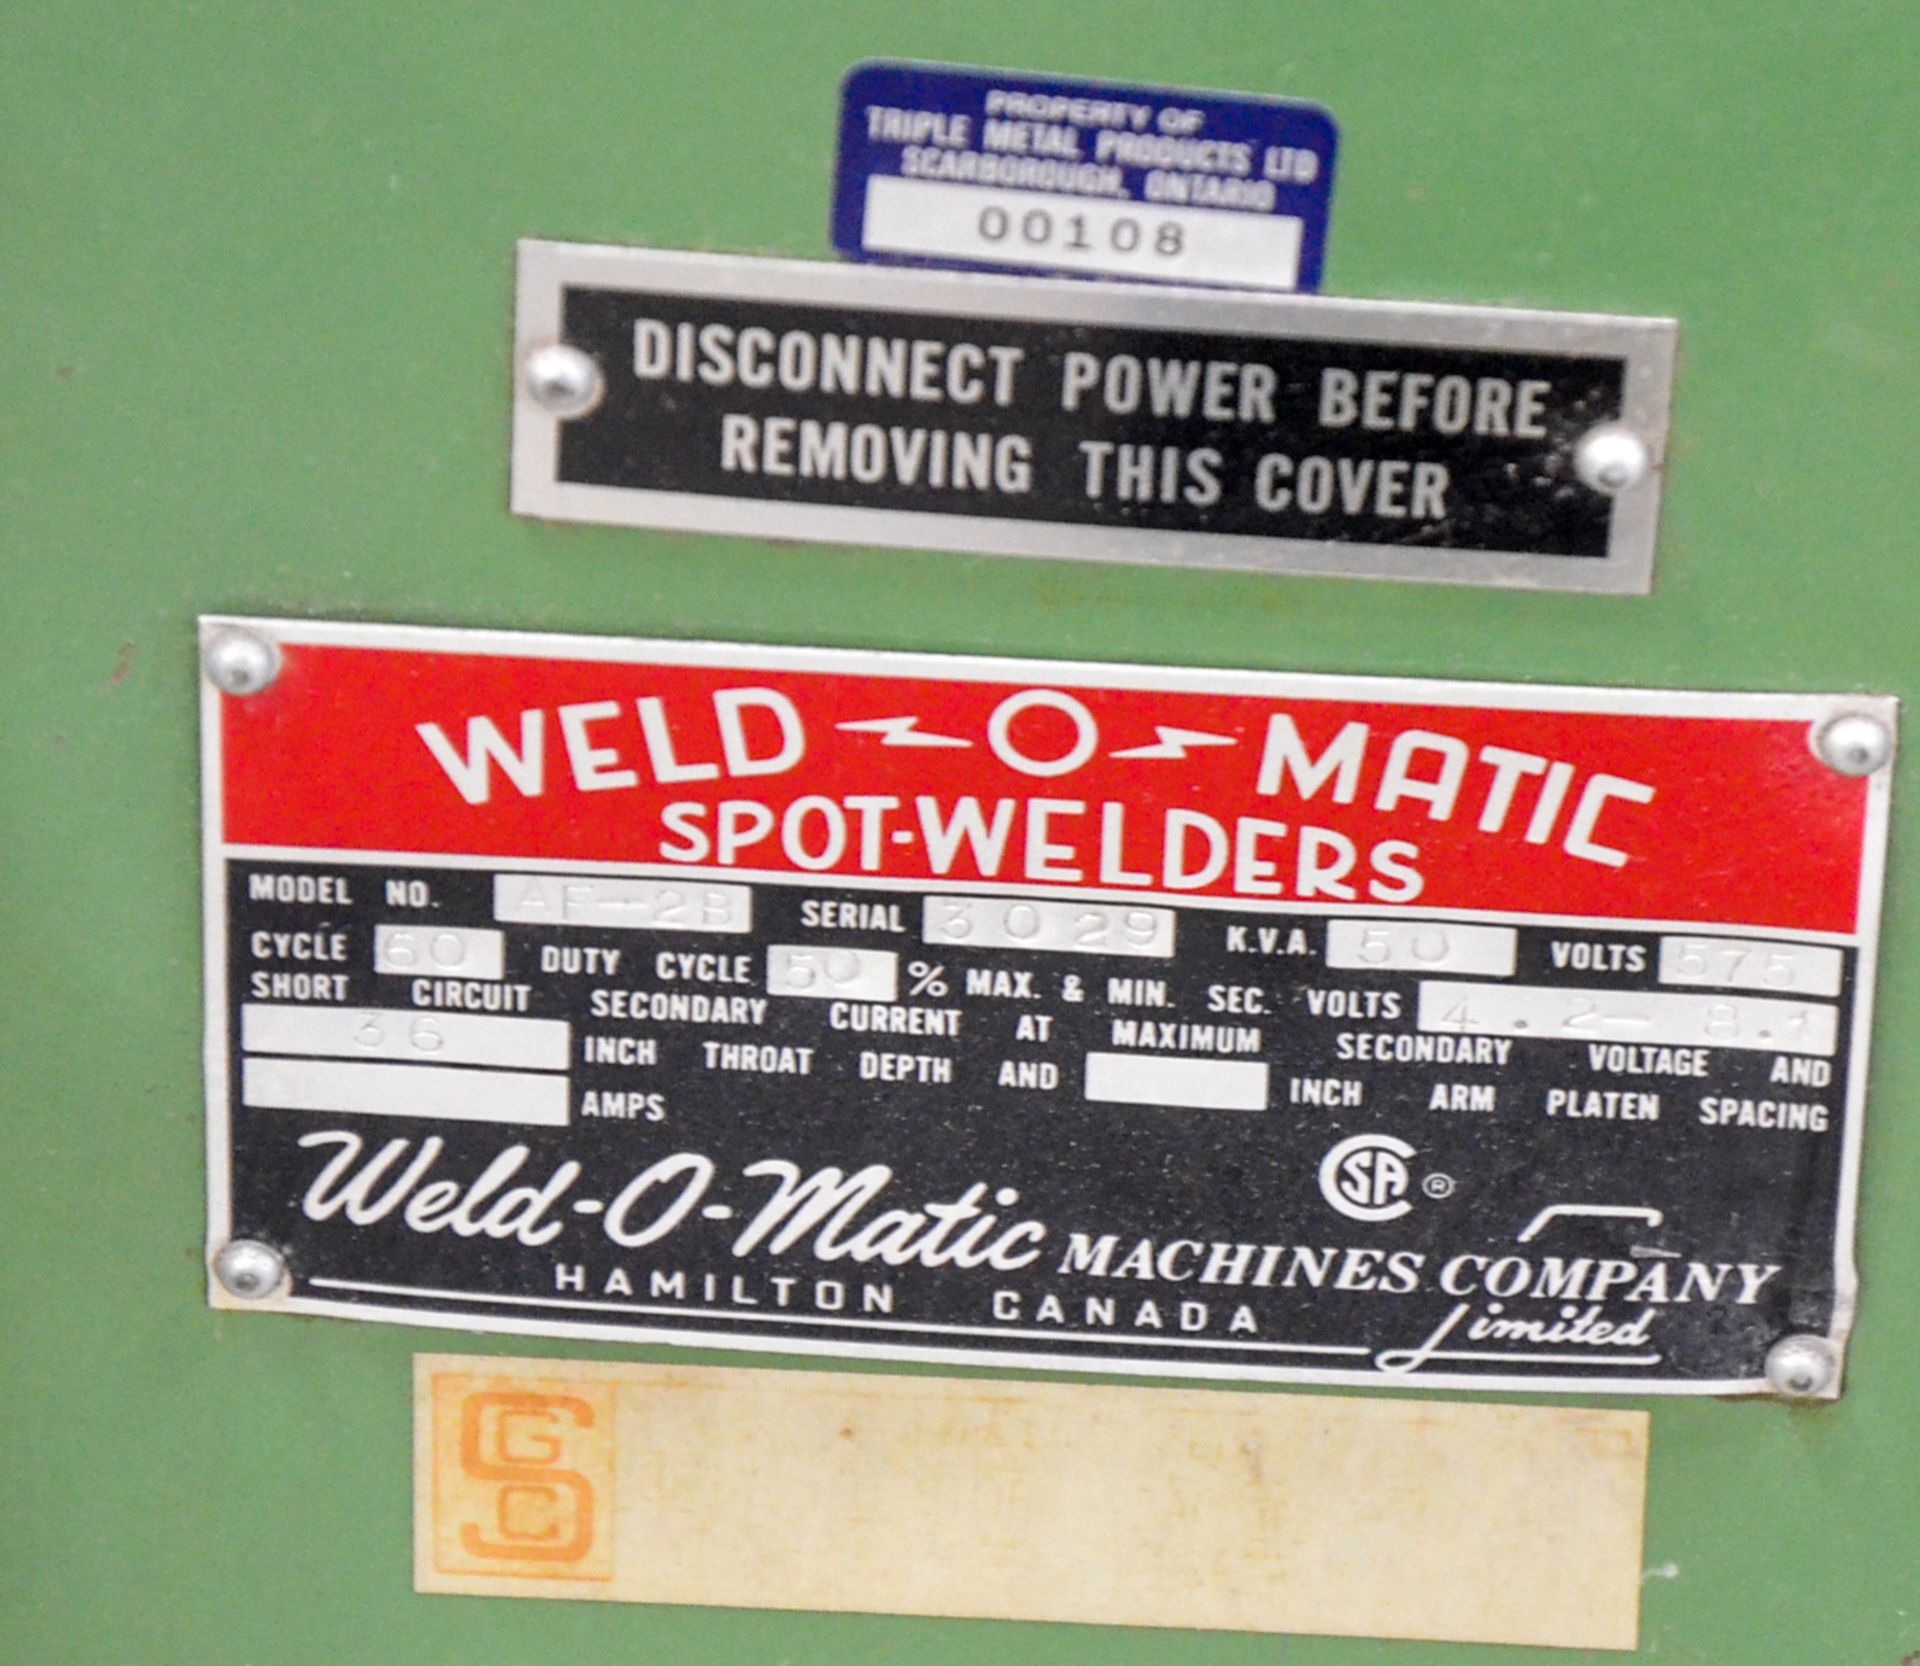 WELD-O-MATIC AF-2B FLOOR-TYPE SPOT WELDER WITH 50 KVA, 35" THROAT, MEDWELD 300S CONTROL, 575V/1PH/ - Image 4 of 4